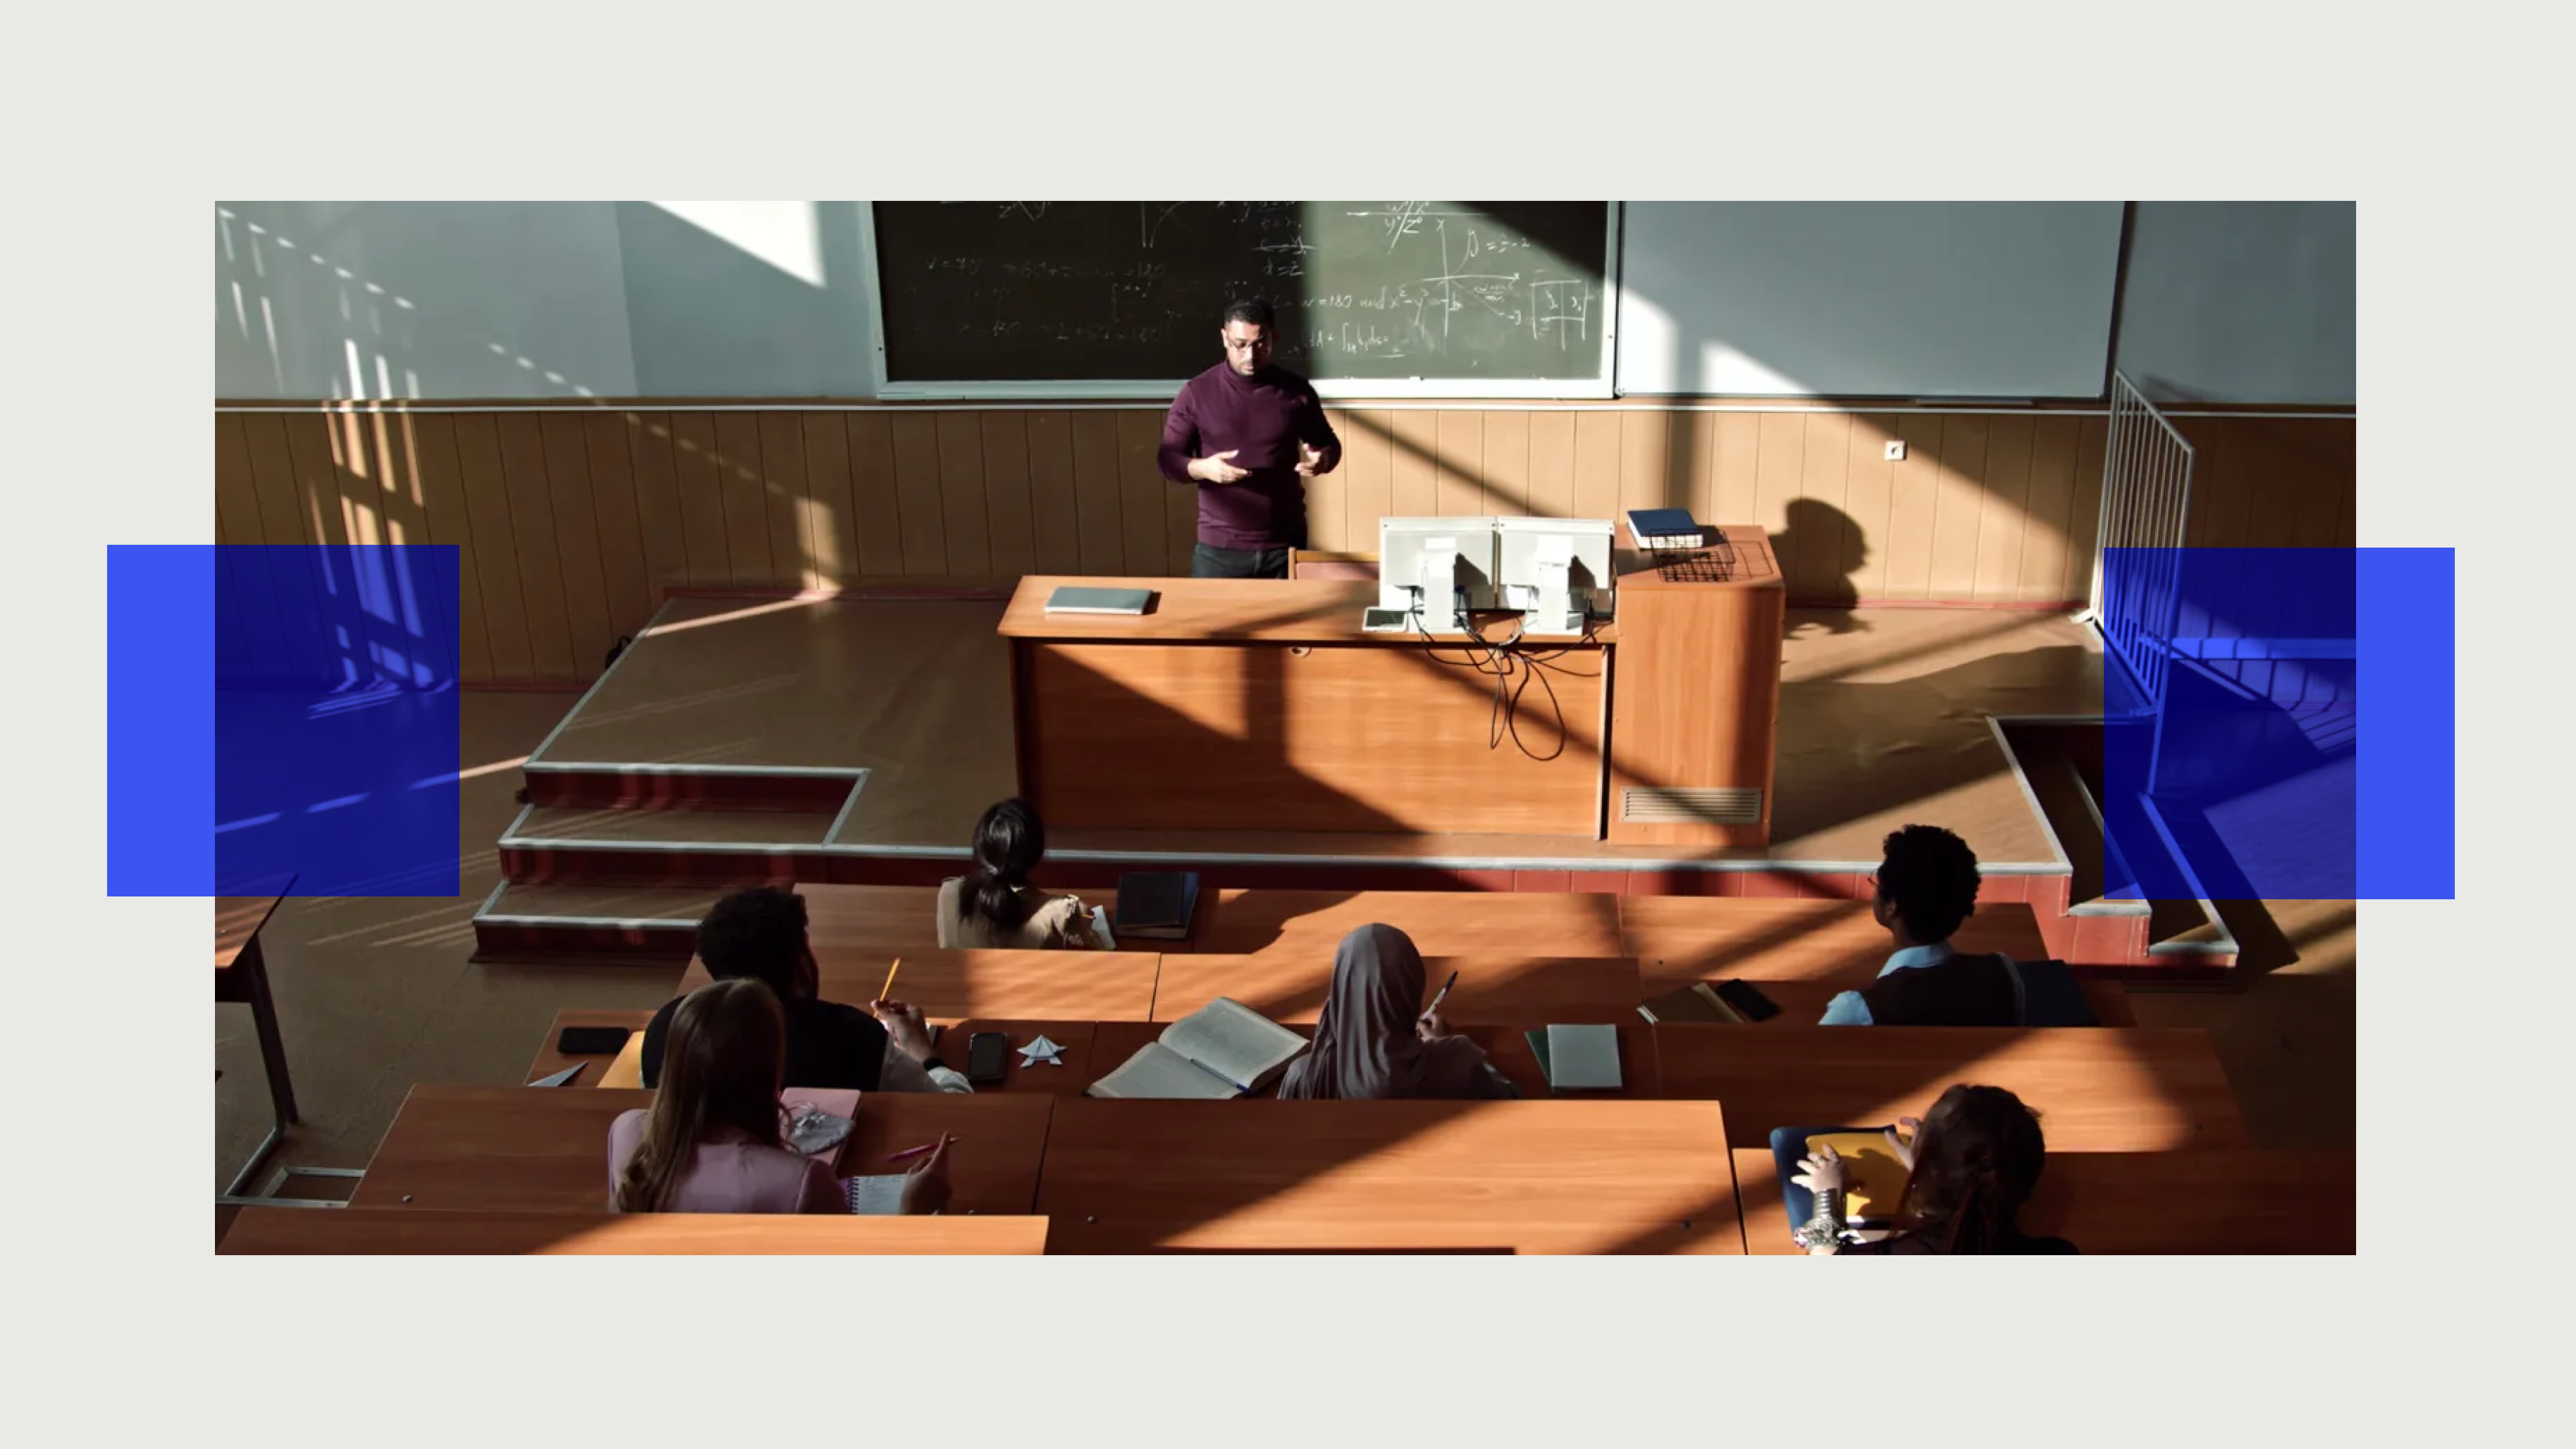 Lecturer standing in front of a classroom, teaching college admissions students seated at desks with sunlight casting shadows.